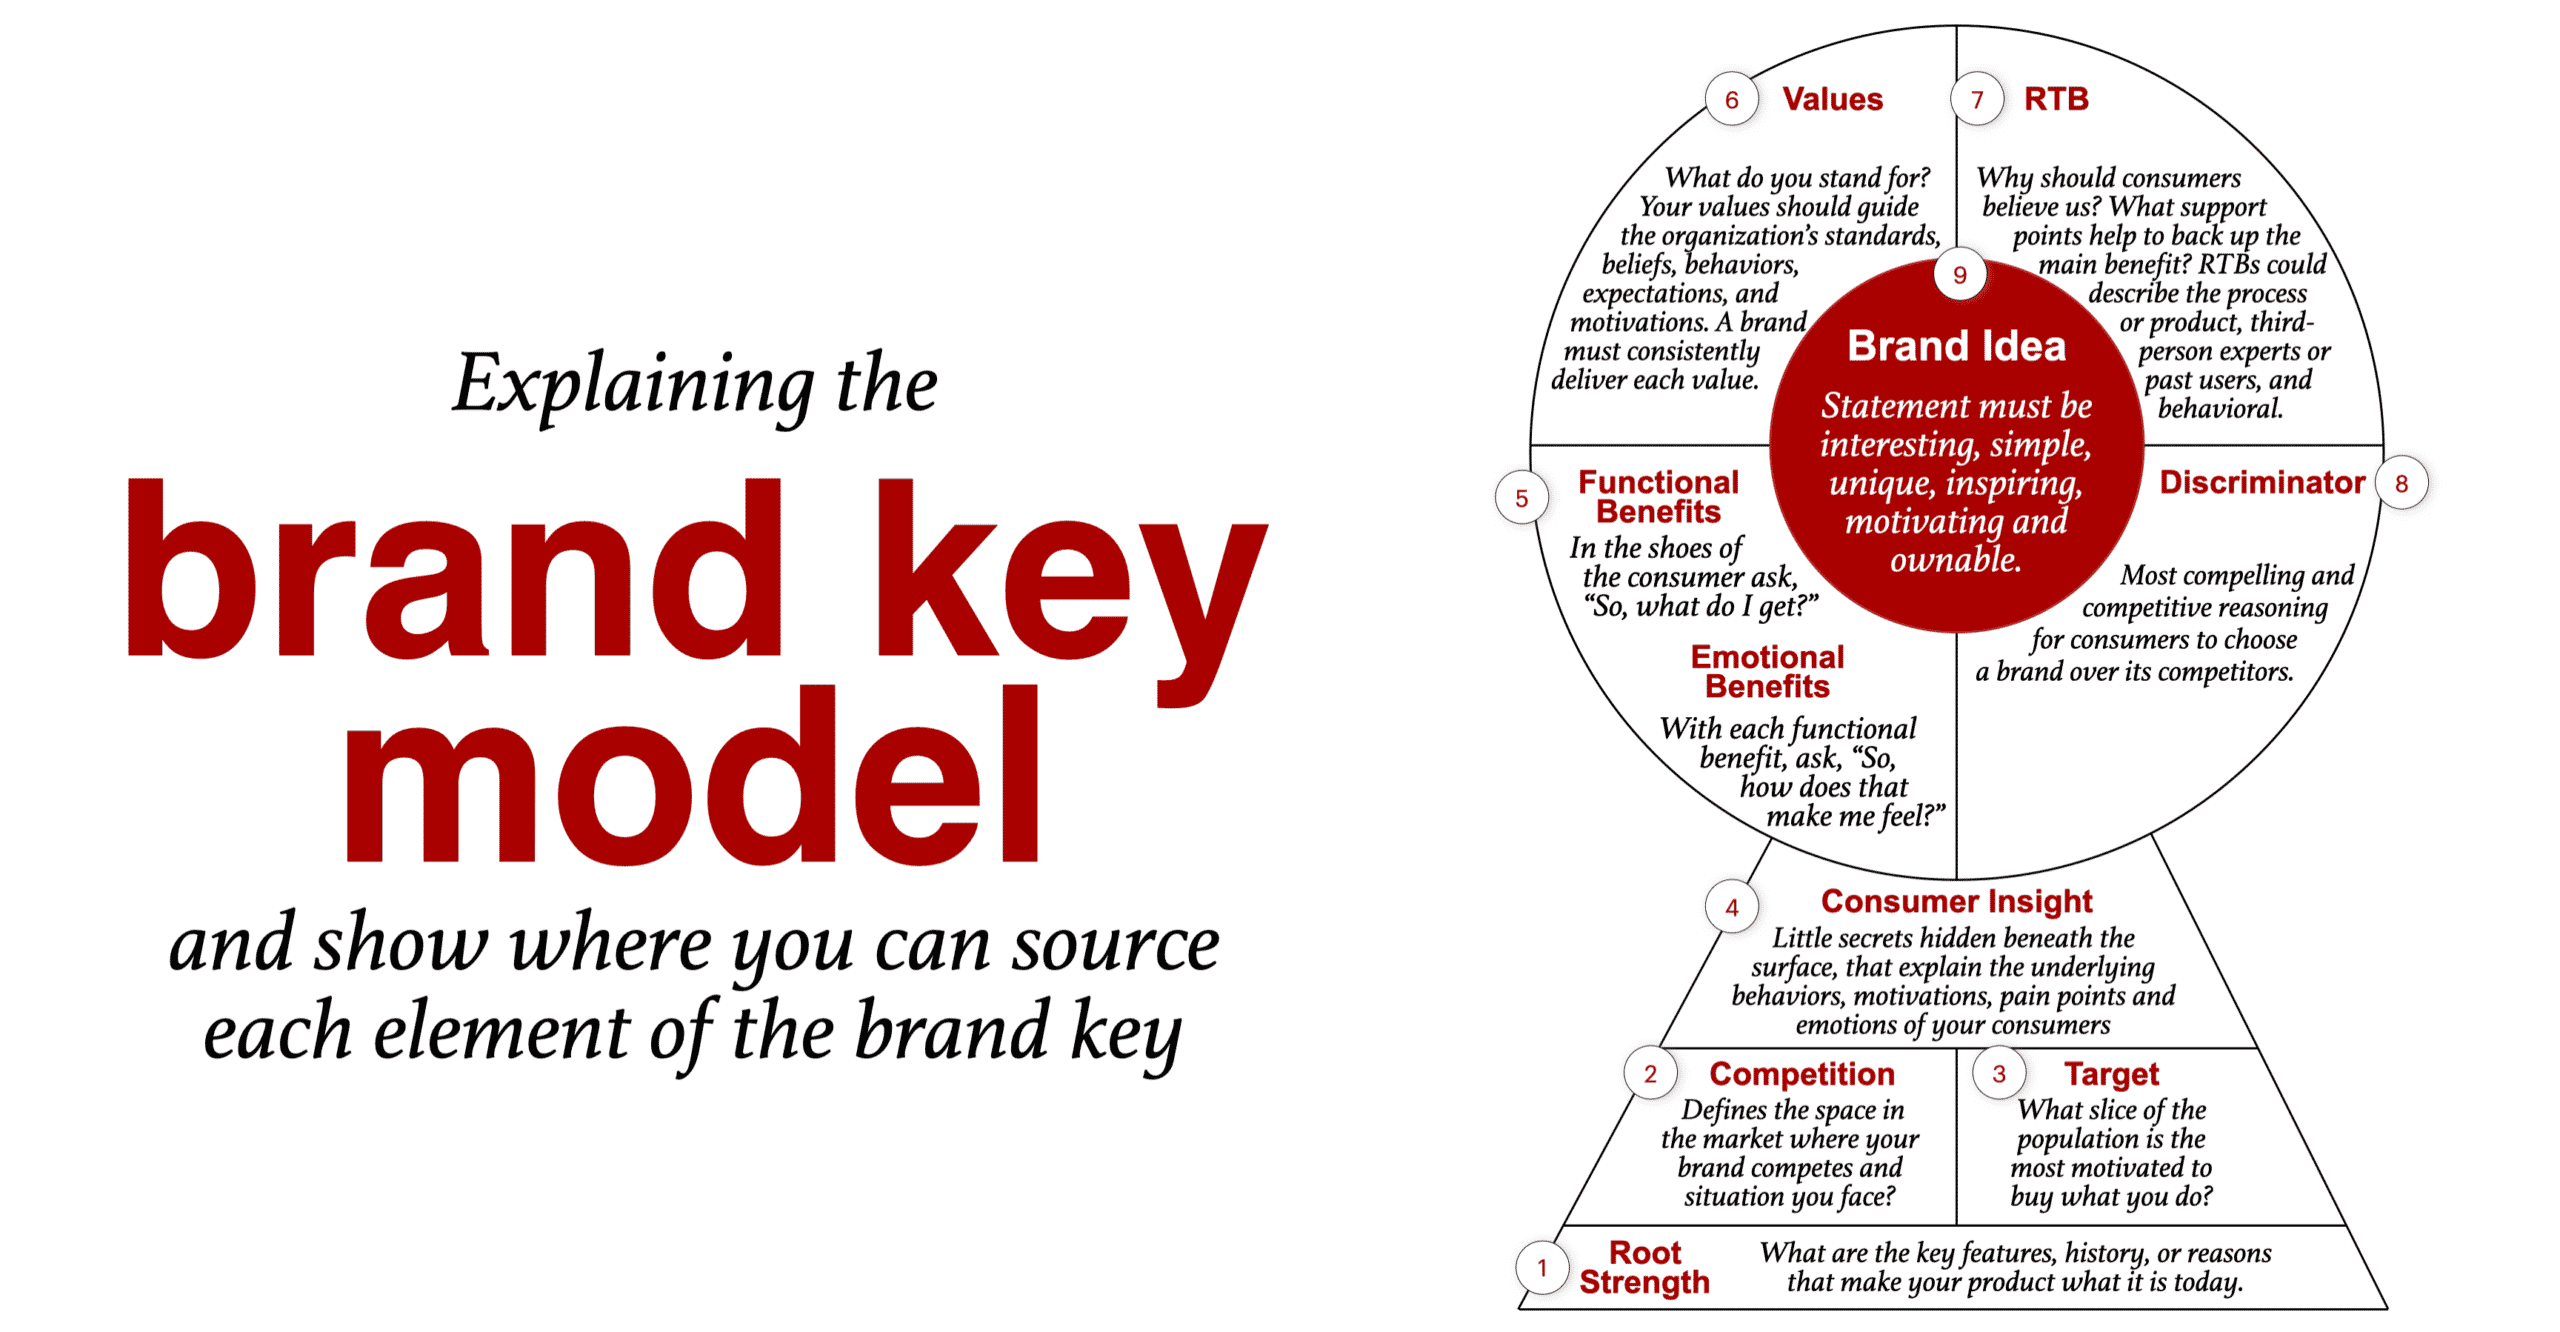 brand key model explained in detail for marketers and Unique selling proposition (USP)